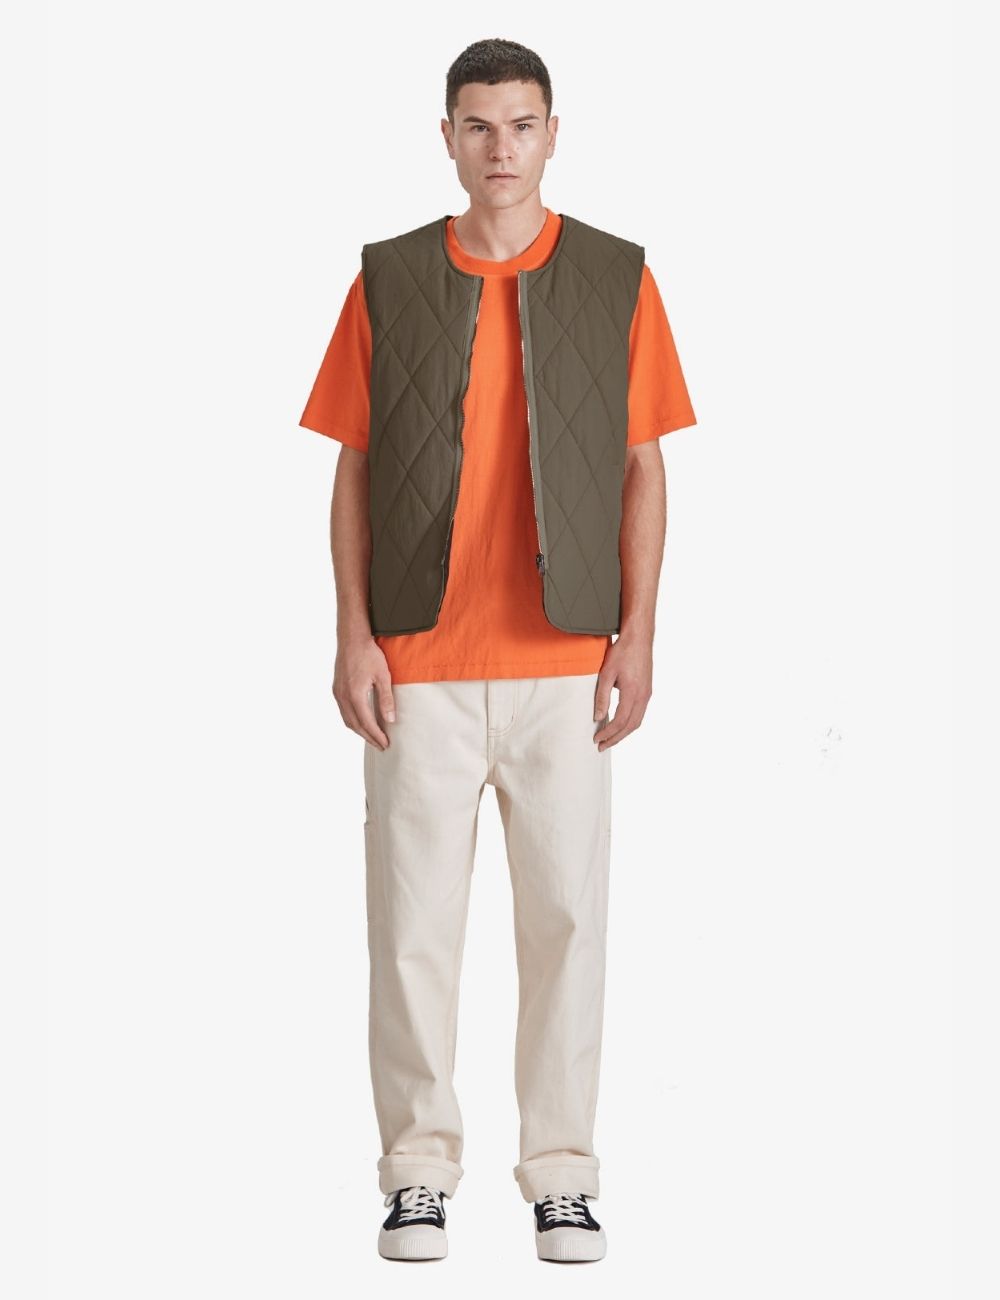 Commoners Quilted Vest - Black/Olive Grey